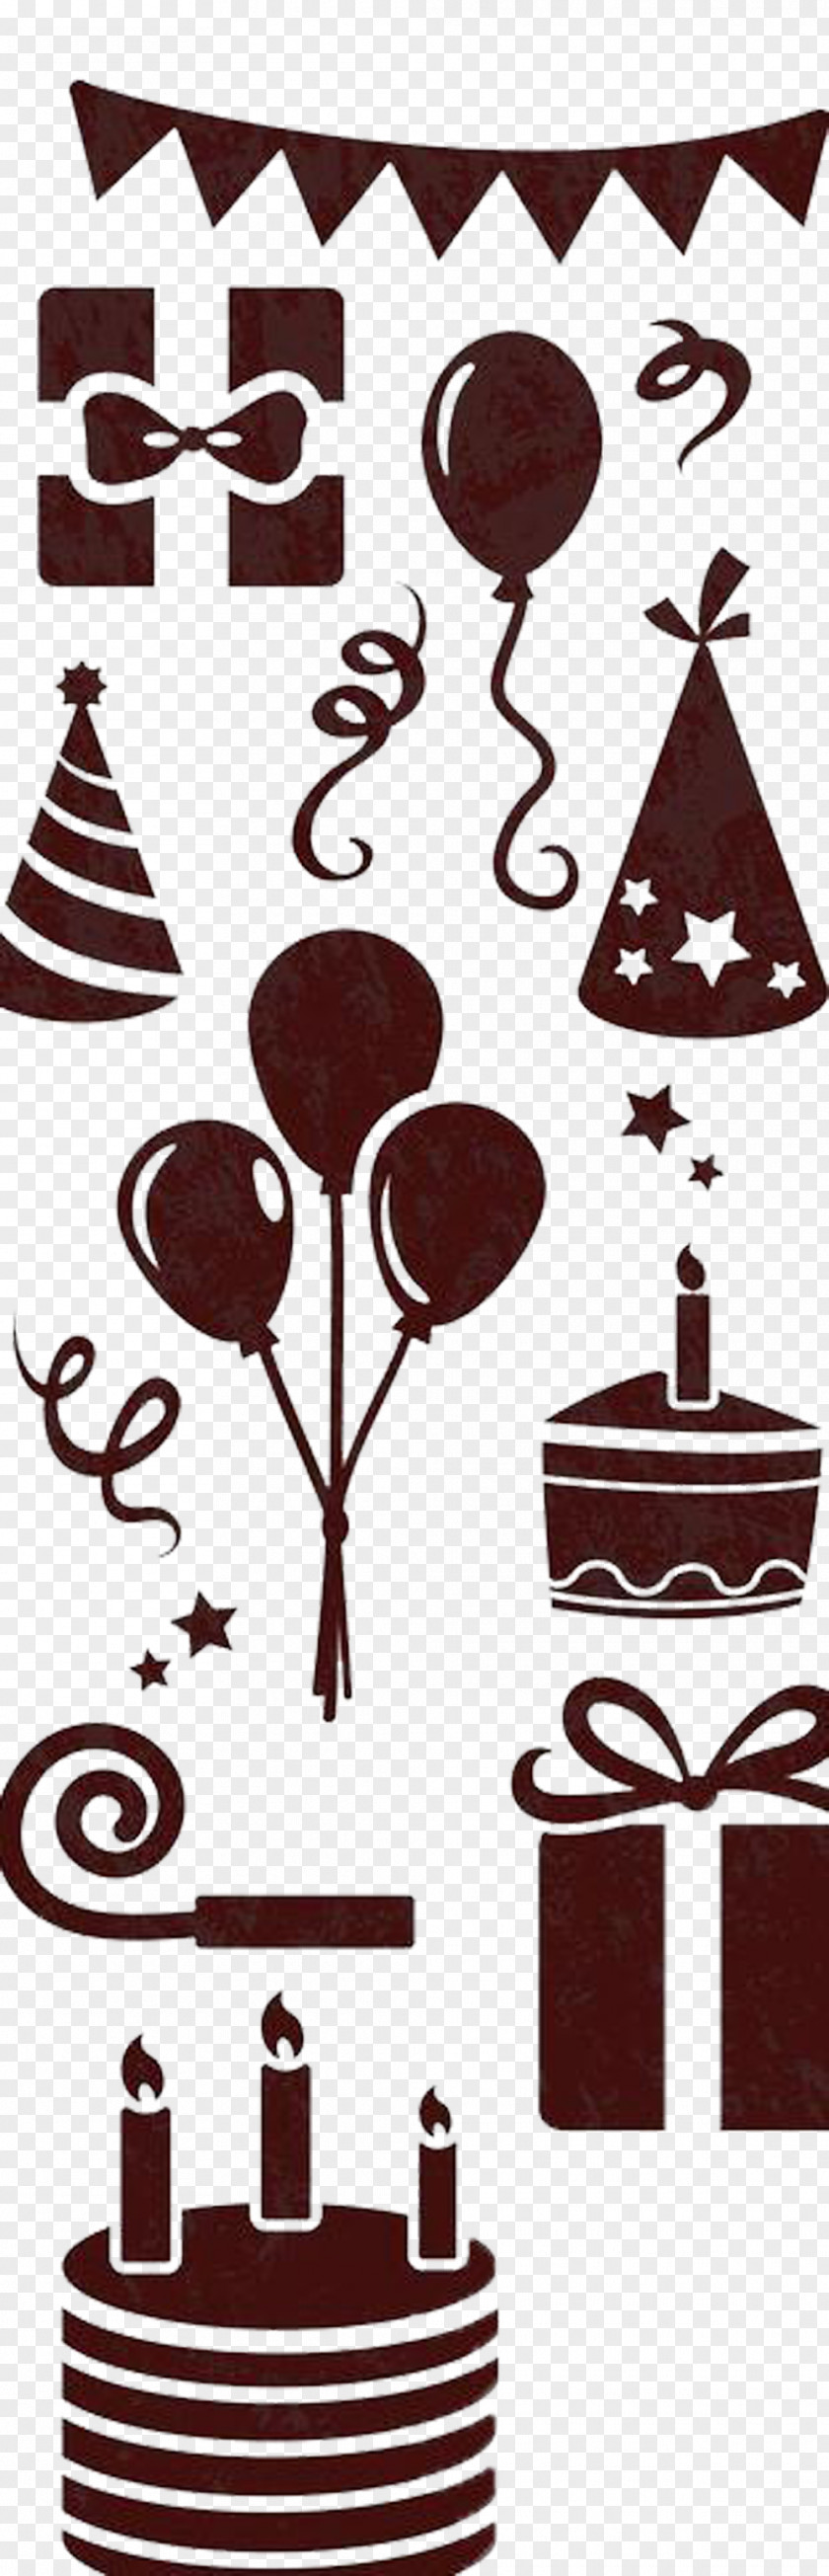 Chocolate Decoration Picture Material Birthday Cake Icon PNG